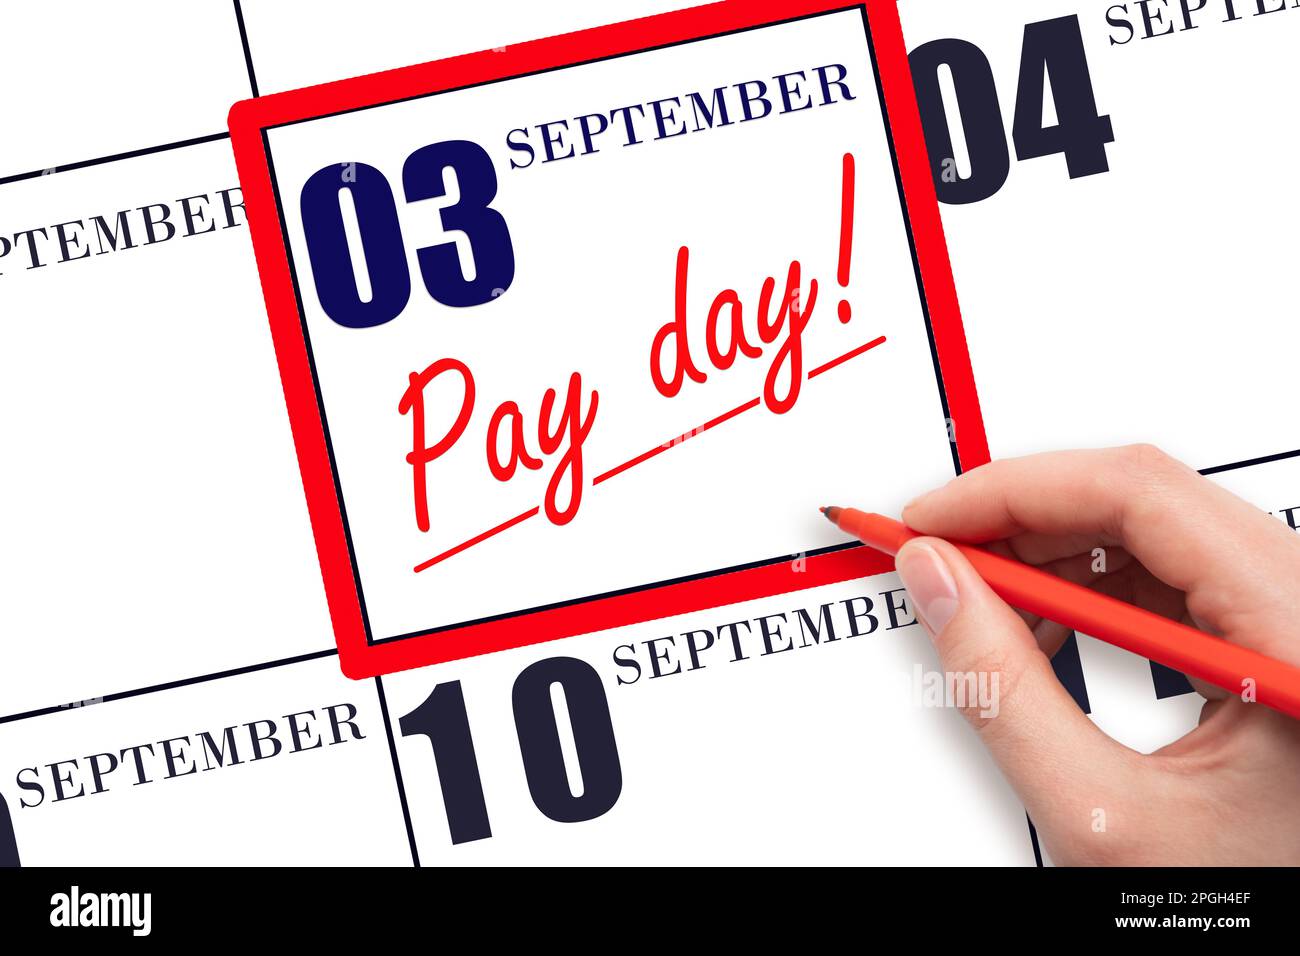 3rd day of September. Hand writing text PAY DATE on calendar date September 3 and underline it. Payment due date. Reminder concept of payment. Autumn Stock Photo